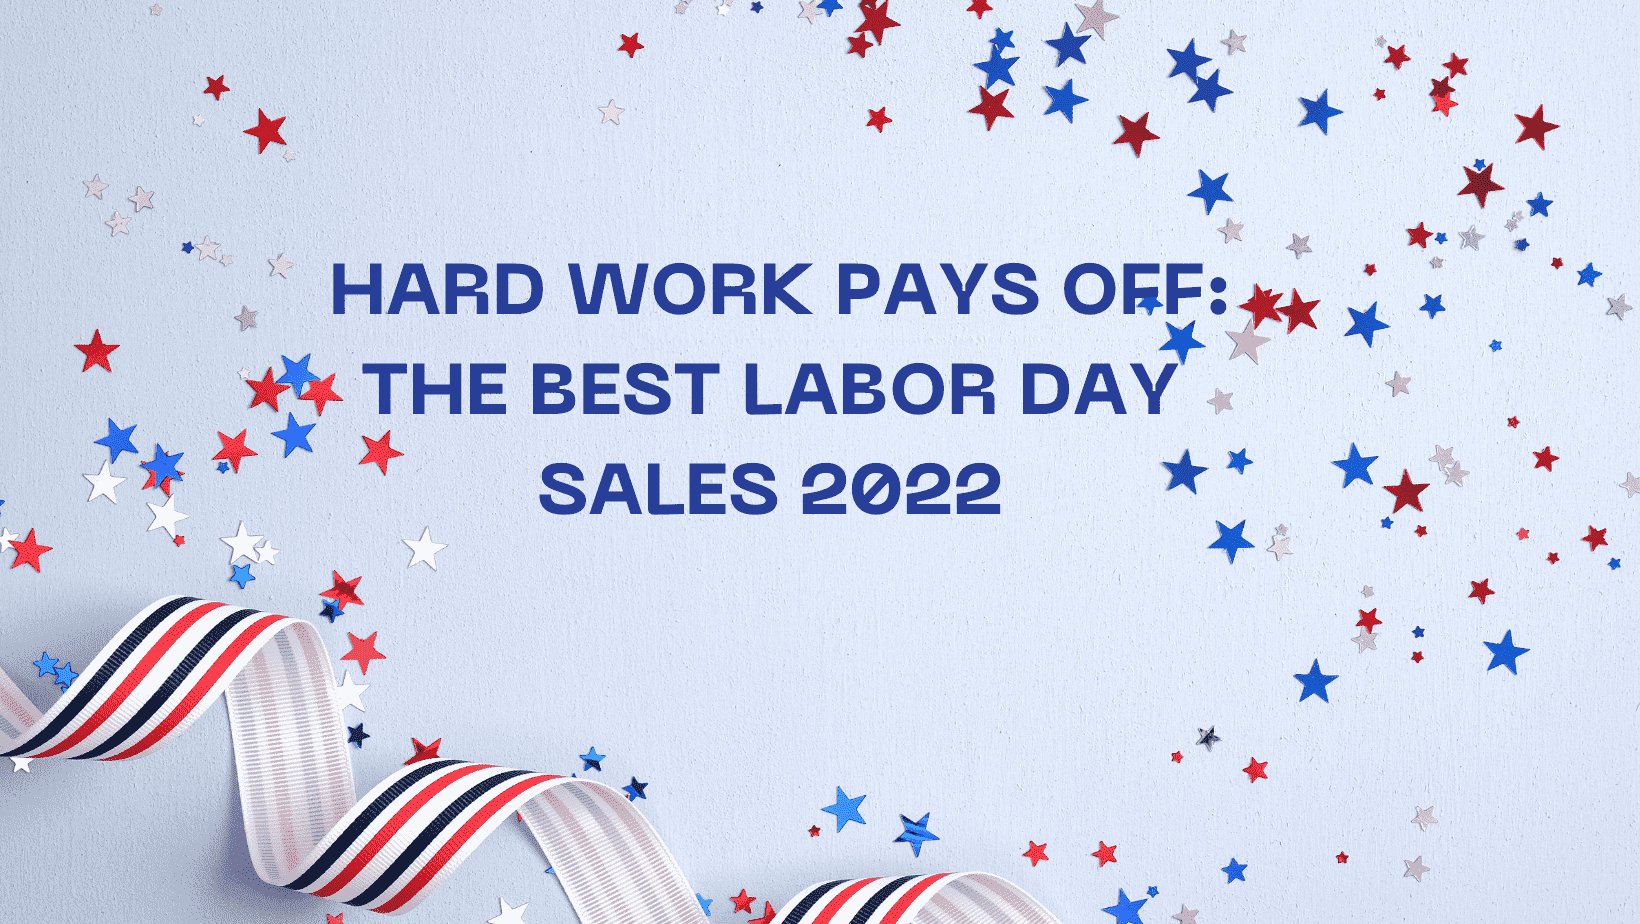 Hard Work Pays Off: The best Labor Day Sales 2022